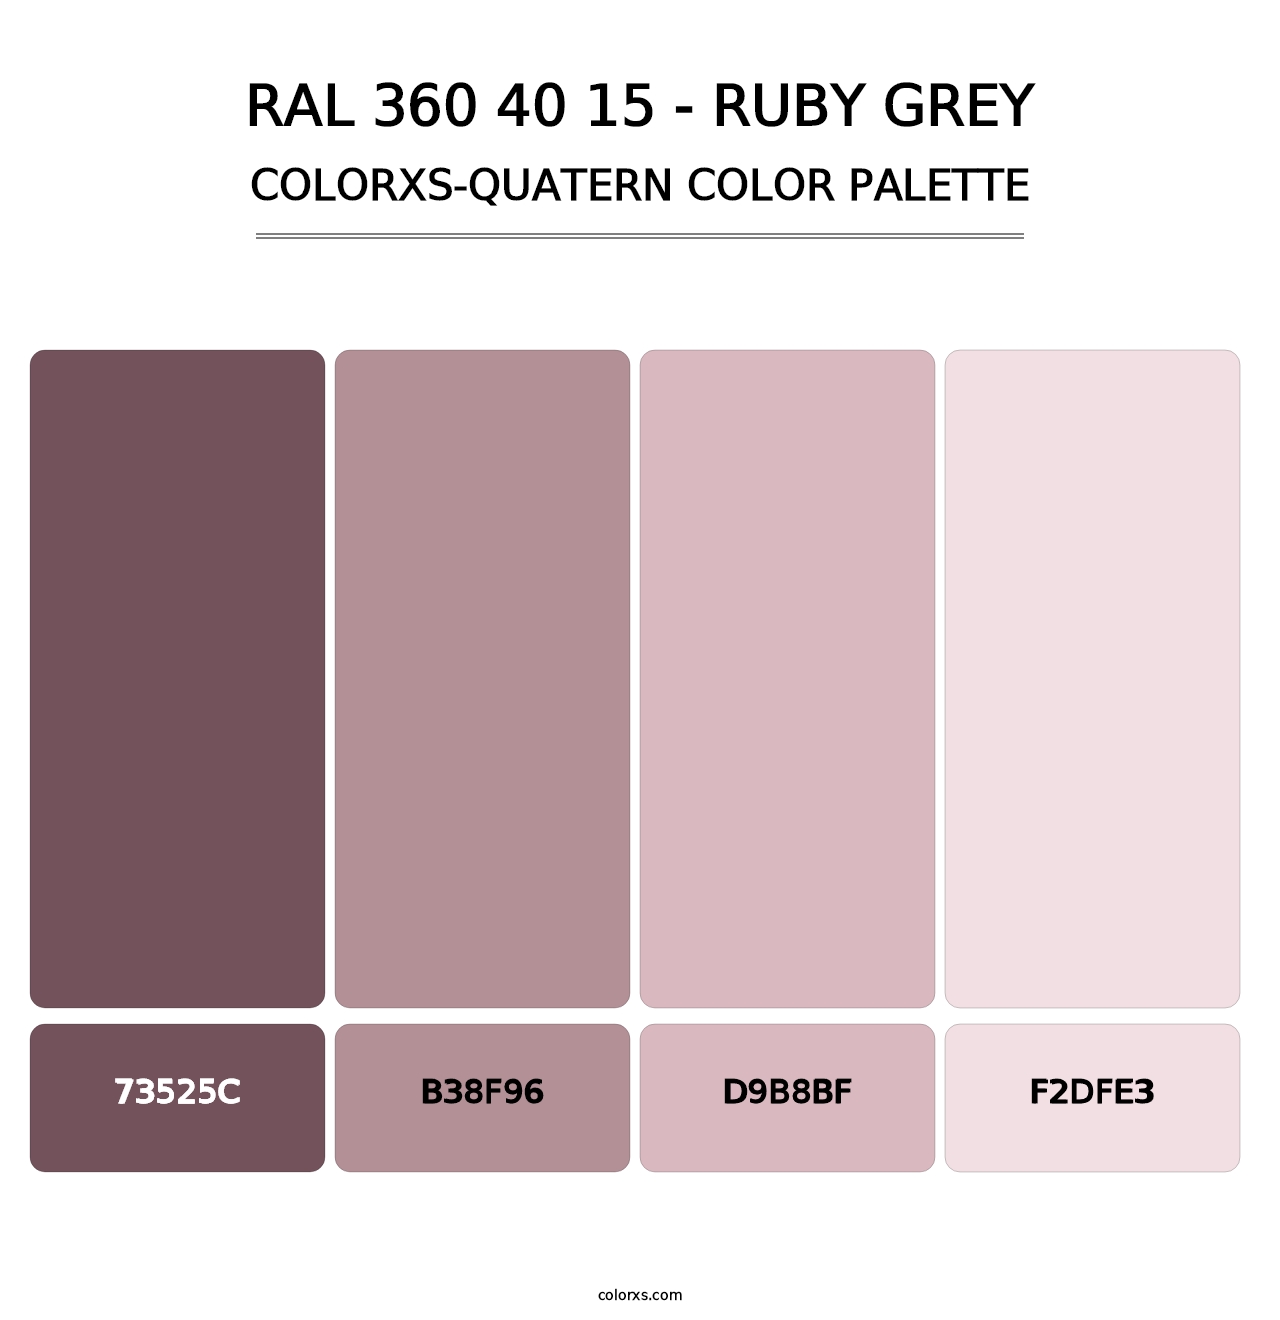 RAL 360 40 15 - Ruby Grey - Colorxs Quatern Palette